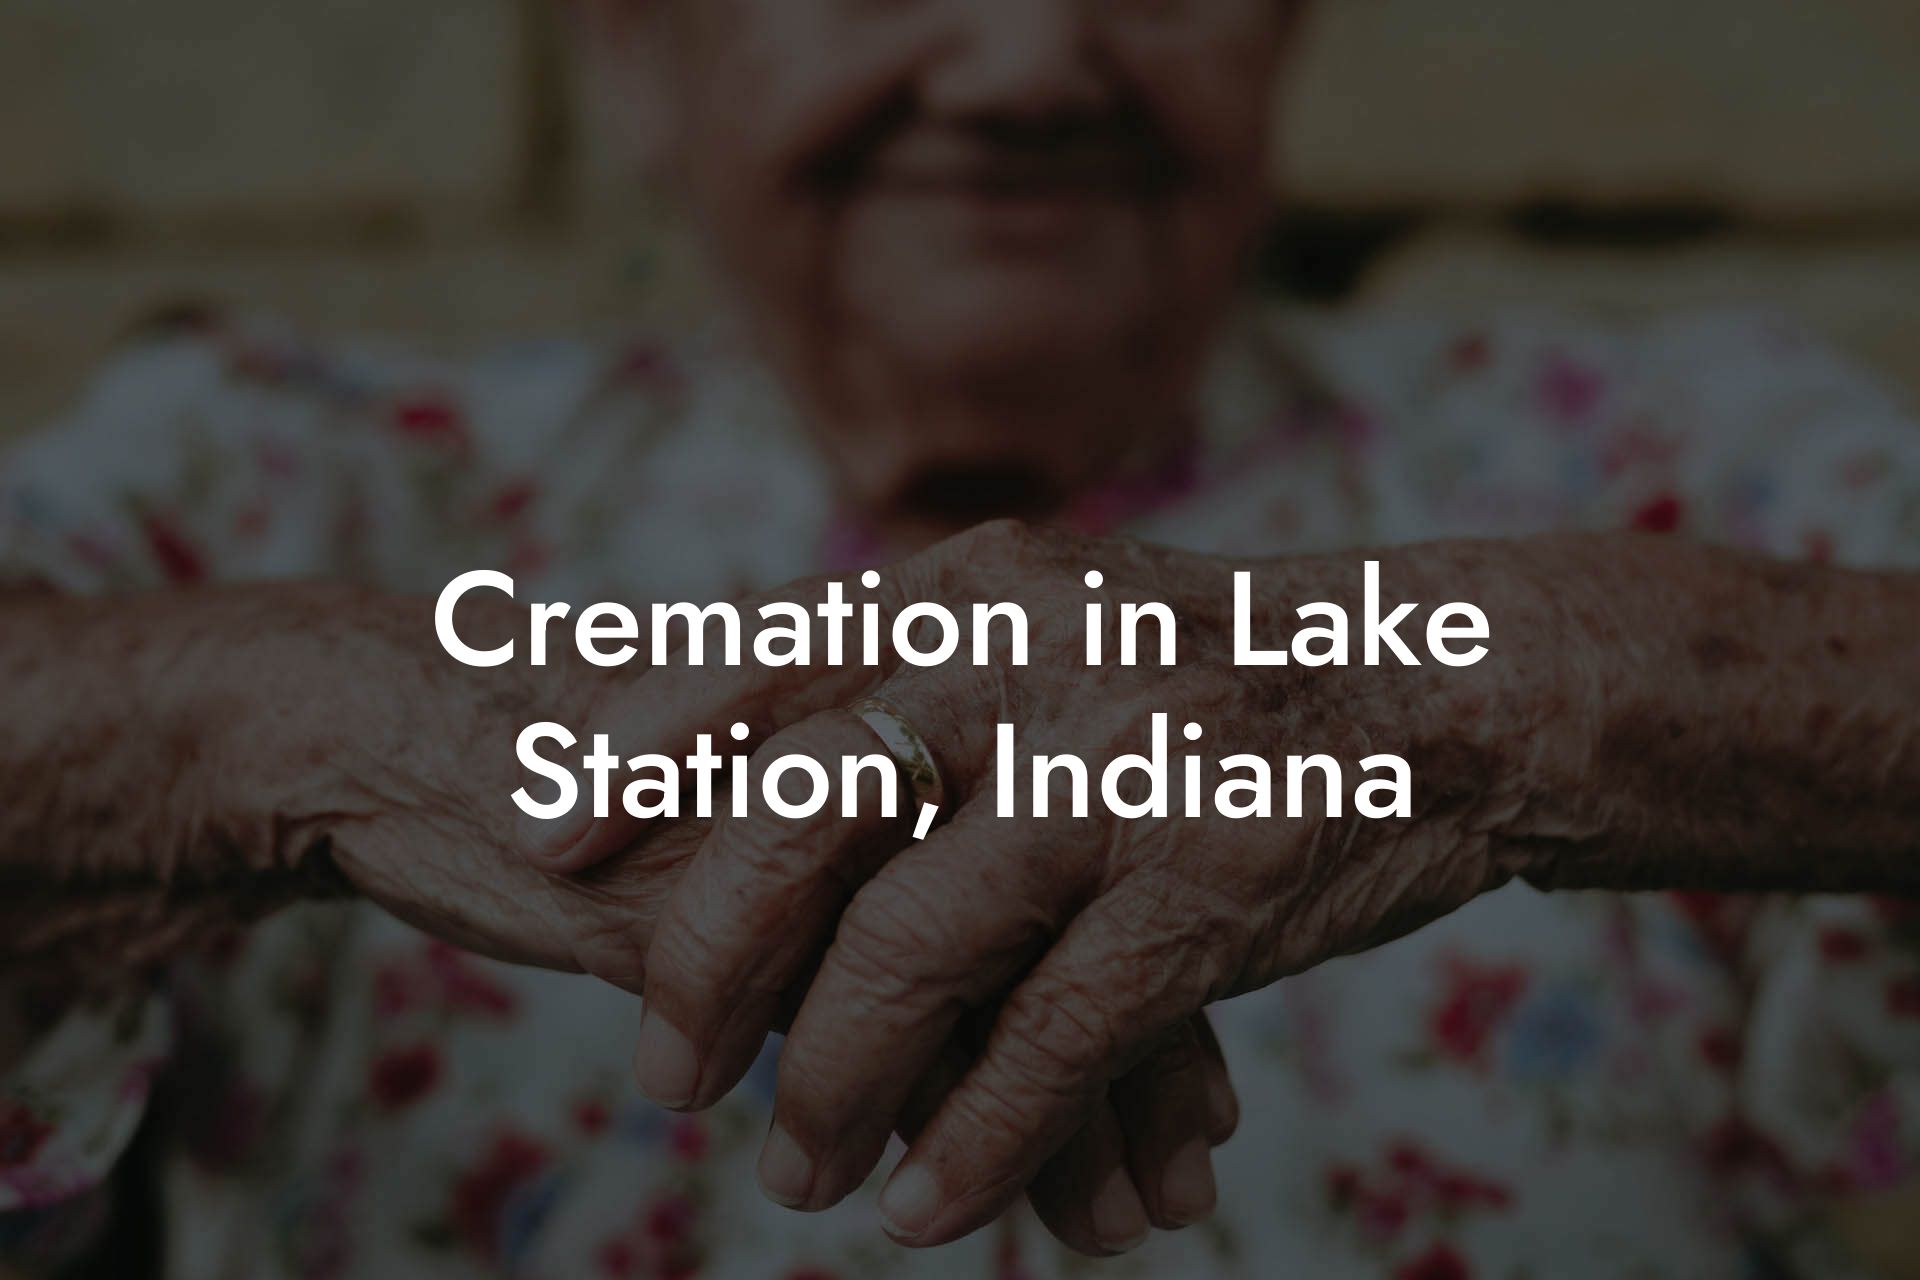 Cremation in Lake Station, Indiana